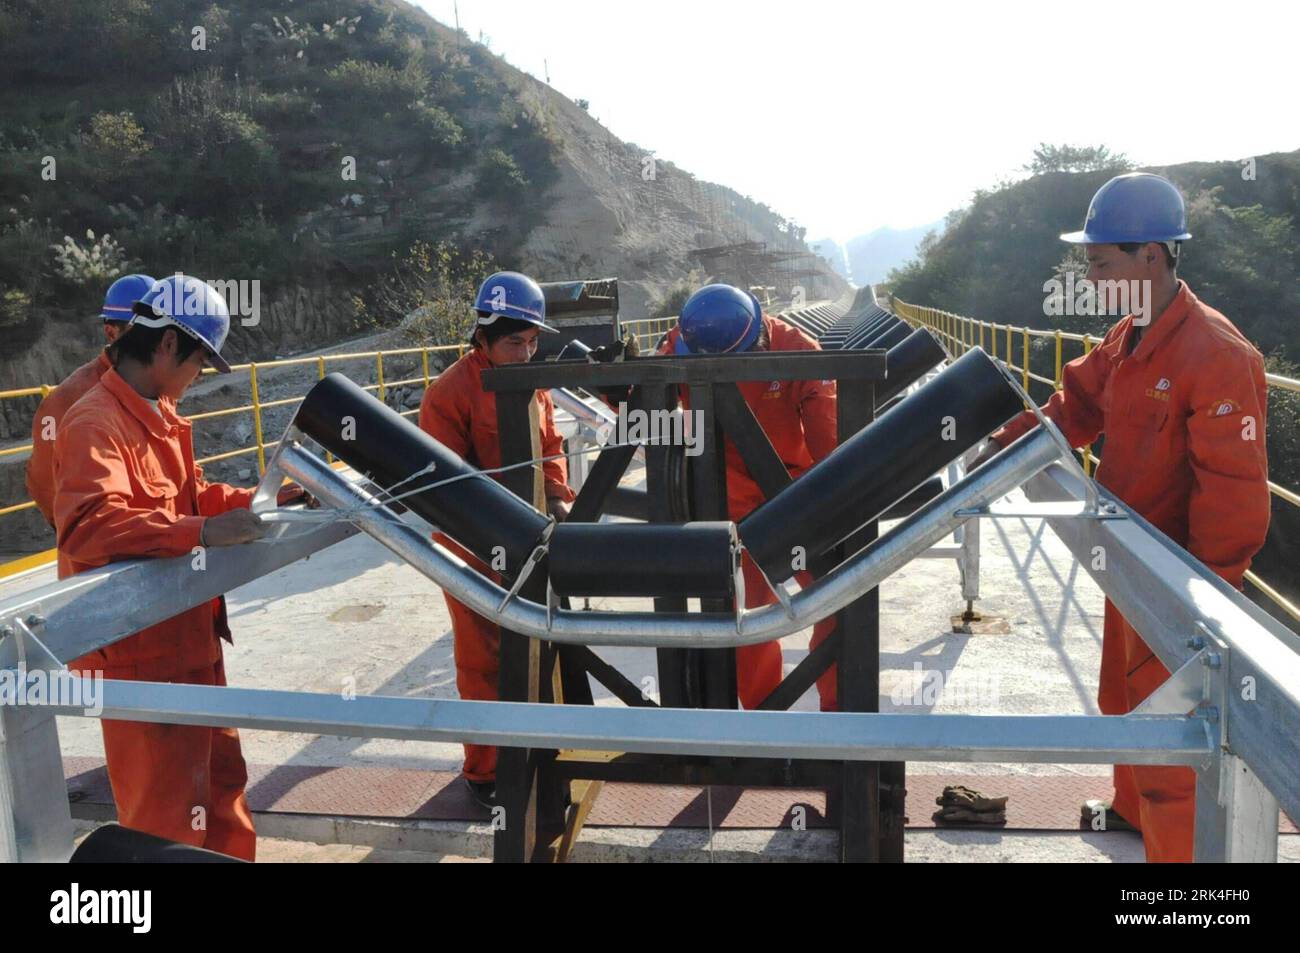 Bildnummer: 53625927  Datum: 23.11.2009  Copyright: imago/Xinhua (091125) -- FENGKAI, Nov. 25, 2009 (Xinhua) -- Workers expedite in the construction with the long distance belt for conveyance of limestone, which boasts a full length of over 40 km and conveyance capability of up to 2,500 tons per hour upon the completion of its construction which adopts the state-of-the-art technology and pipelining, at Fengkai County, south China s Guangdong Province, Nov. 23, 2009. (Xinhua/Wei Shiming) (px) (1)CHINA-GUANGDONG-CONVEYANCE BELT-LIMESTONE-CONSTRUCTION(CN) PUBLICATIONxNOTxINxCHN Wirtschaft Bau Bau Stock Photo